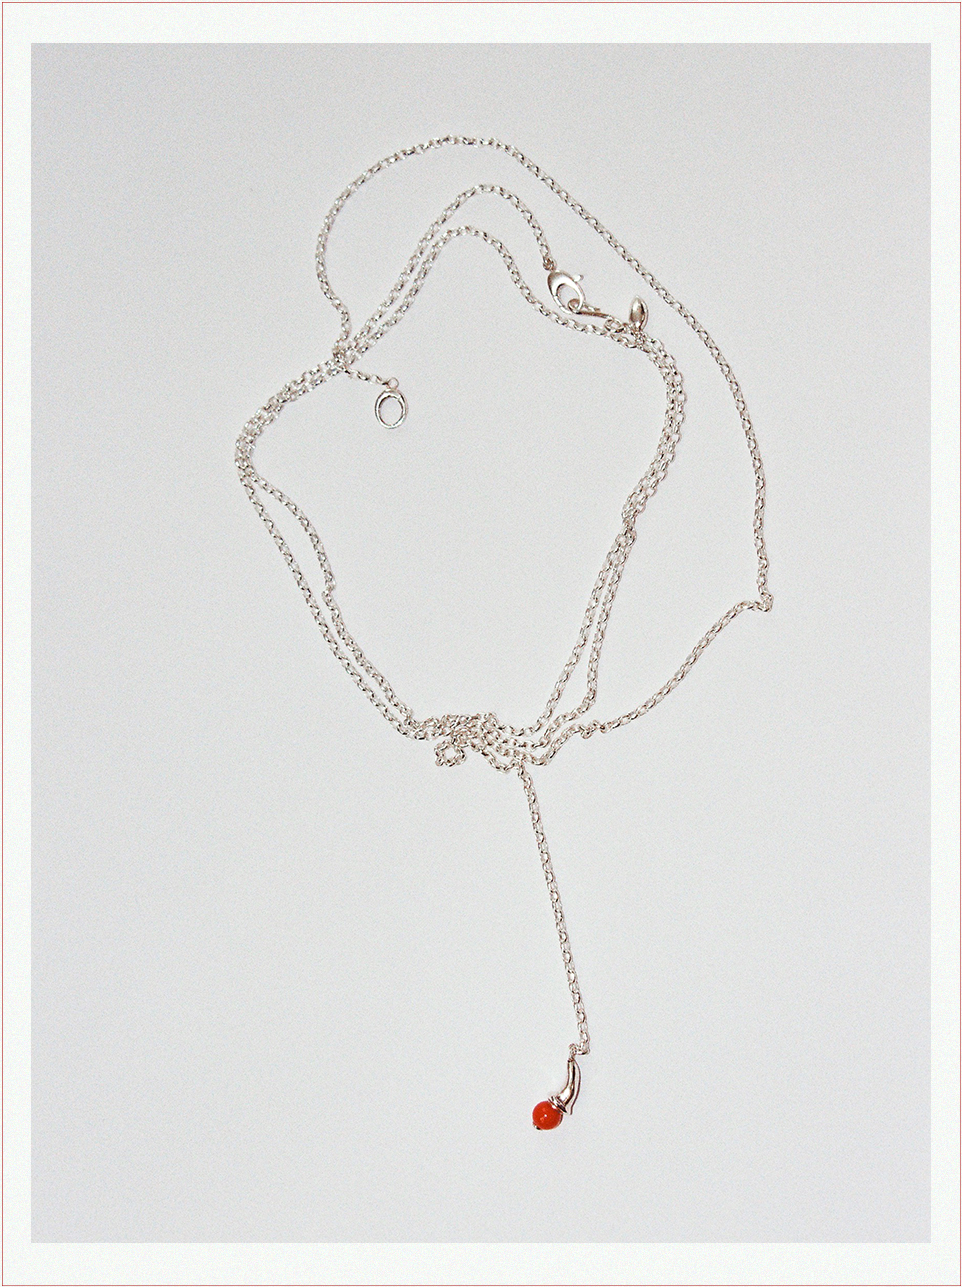 Red bud necklace